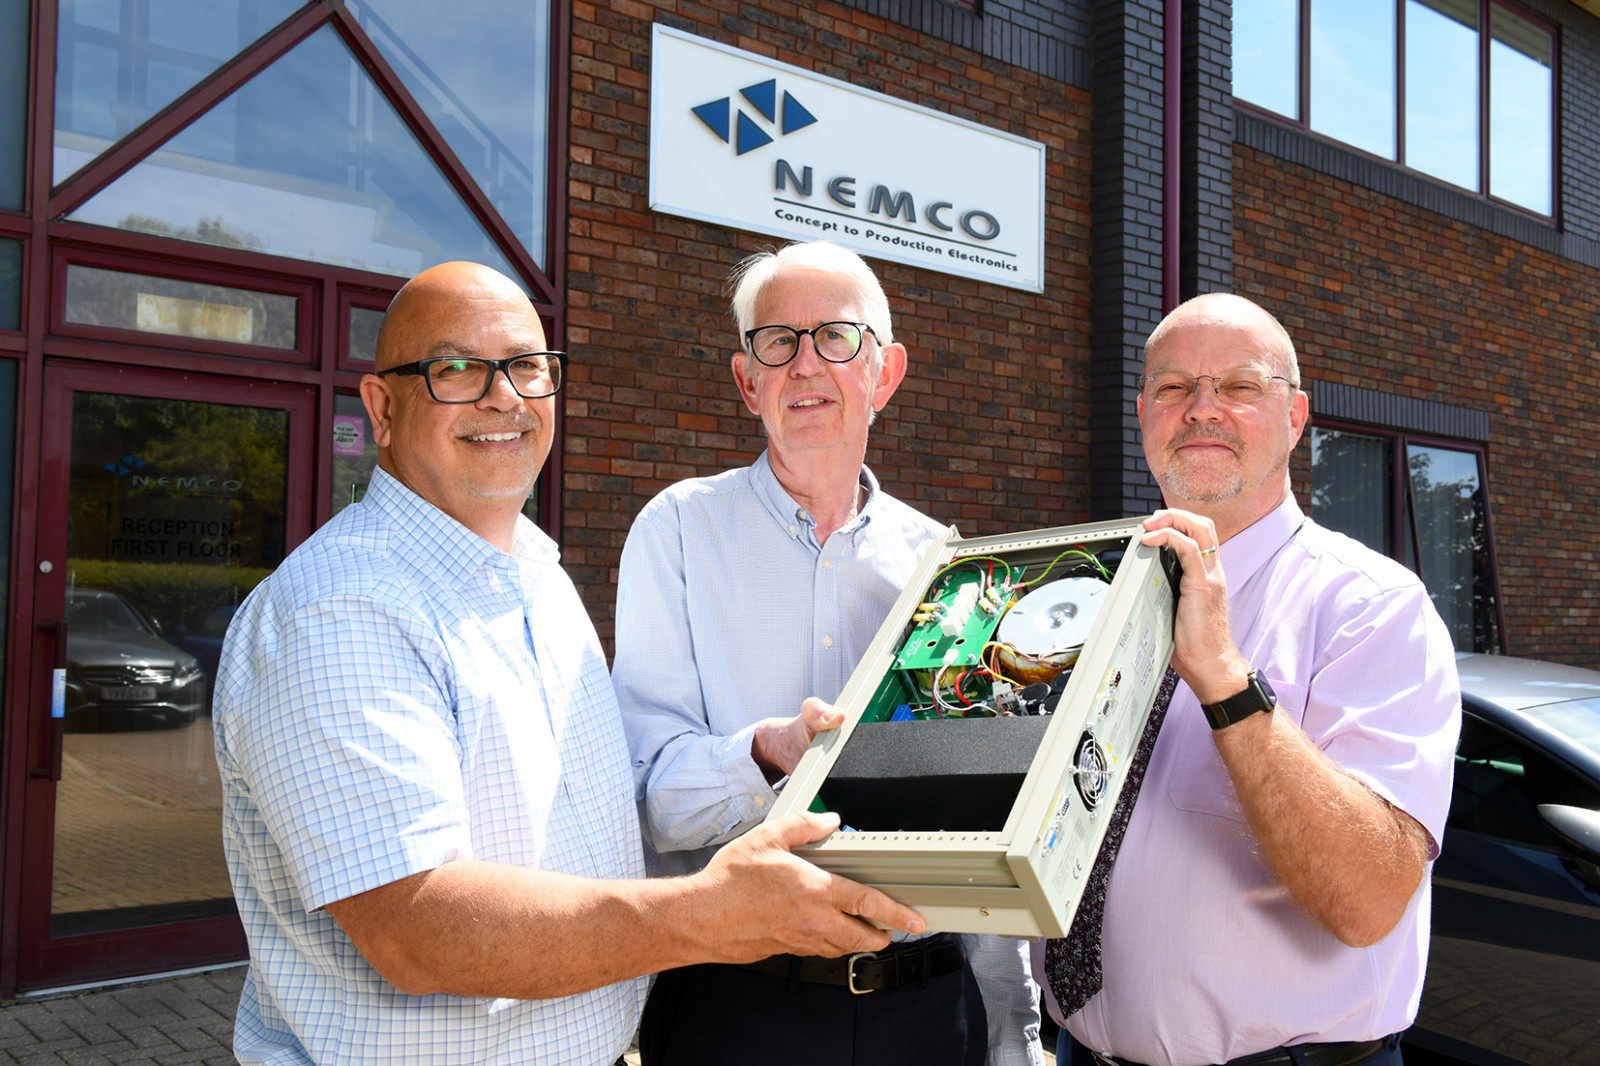 Nemco joins MAN Group as it aims to push sales towards £30m